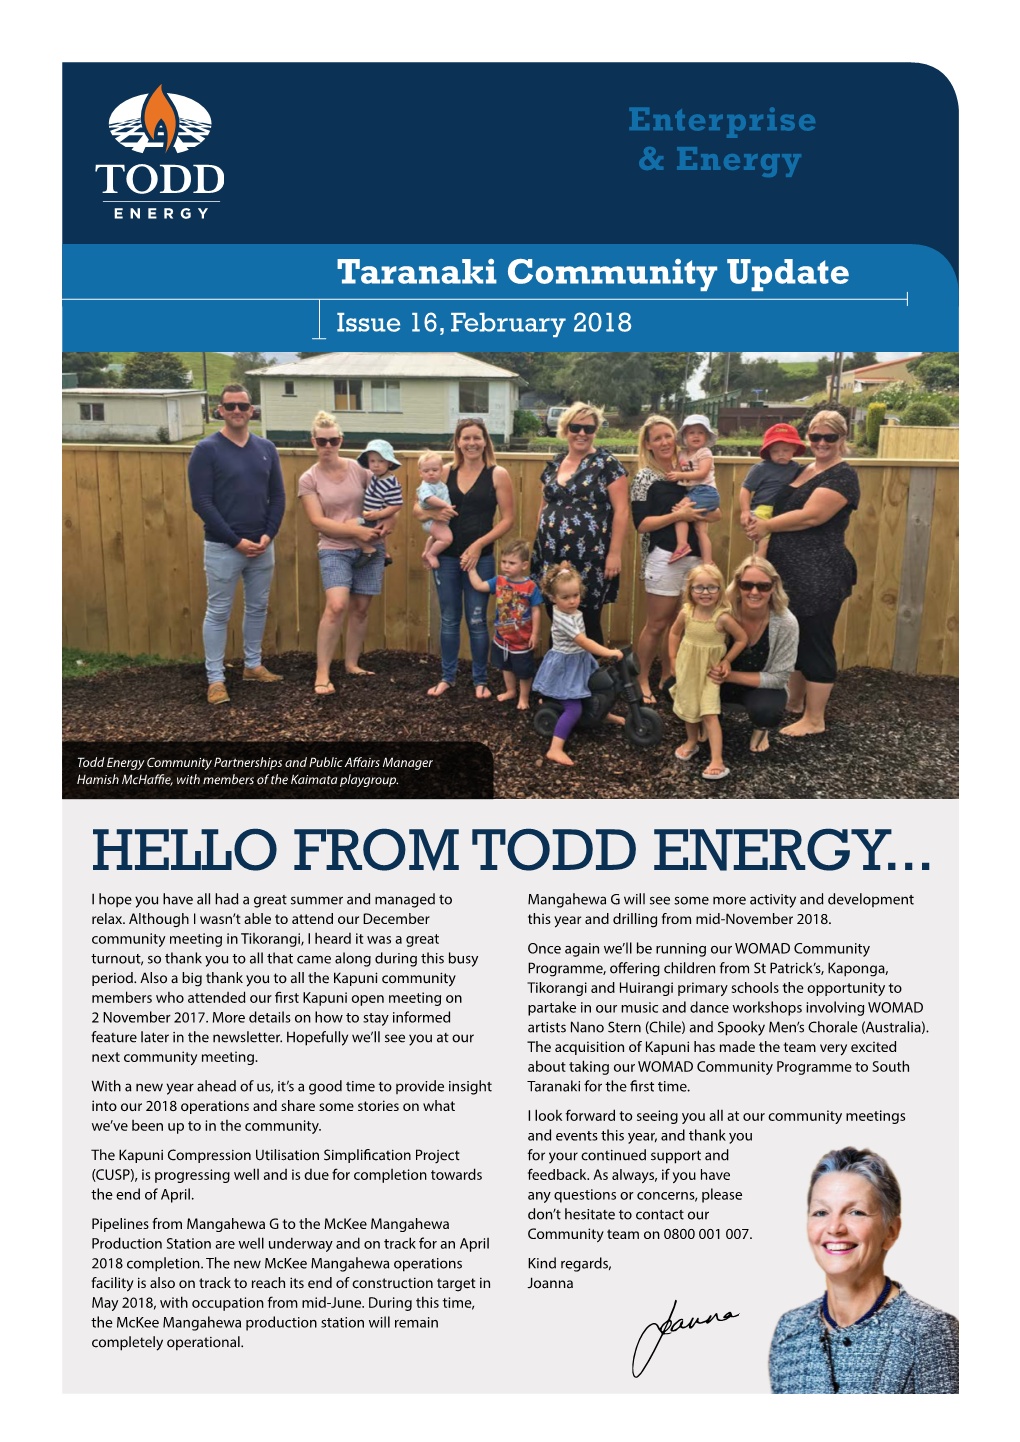 HELLO from TODD ENERGY... I Hope You Have All Had a Great Summer and Managed to Mangahewa G Will See Some More Activity and Development Relax